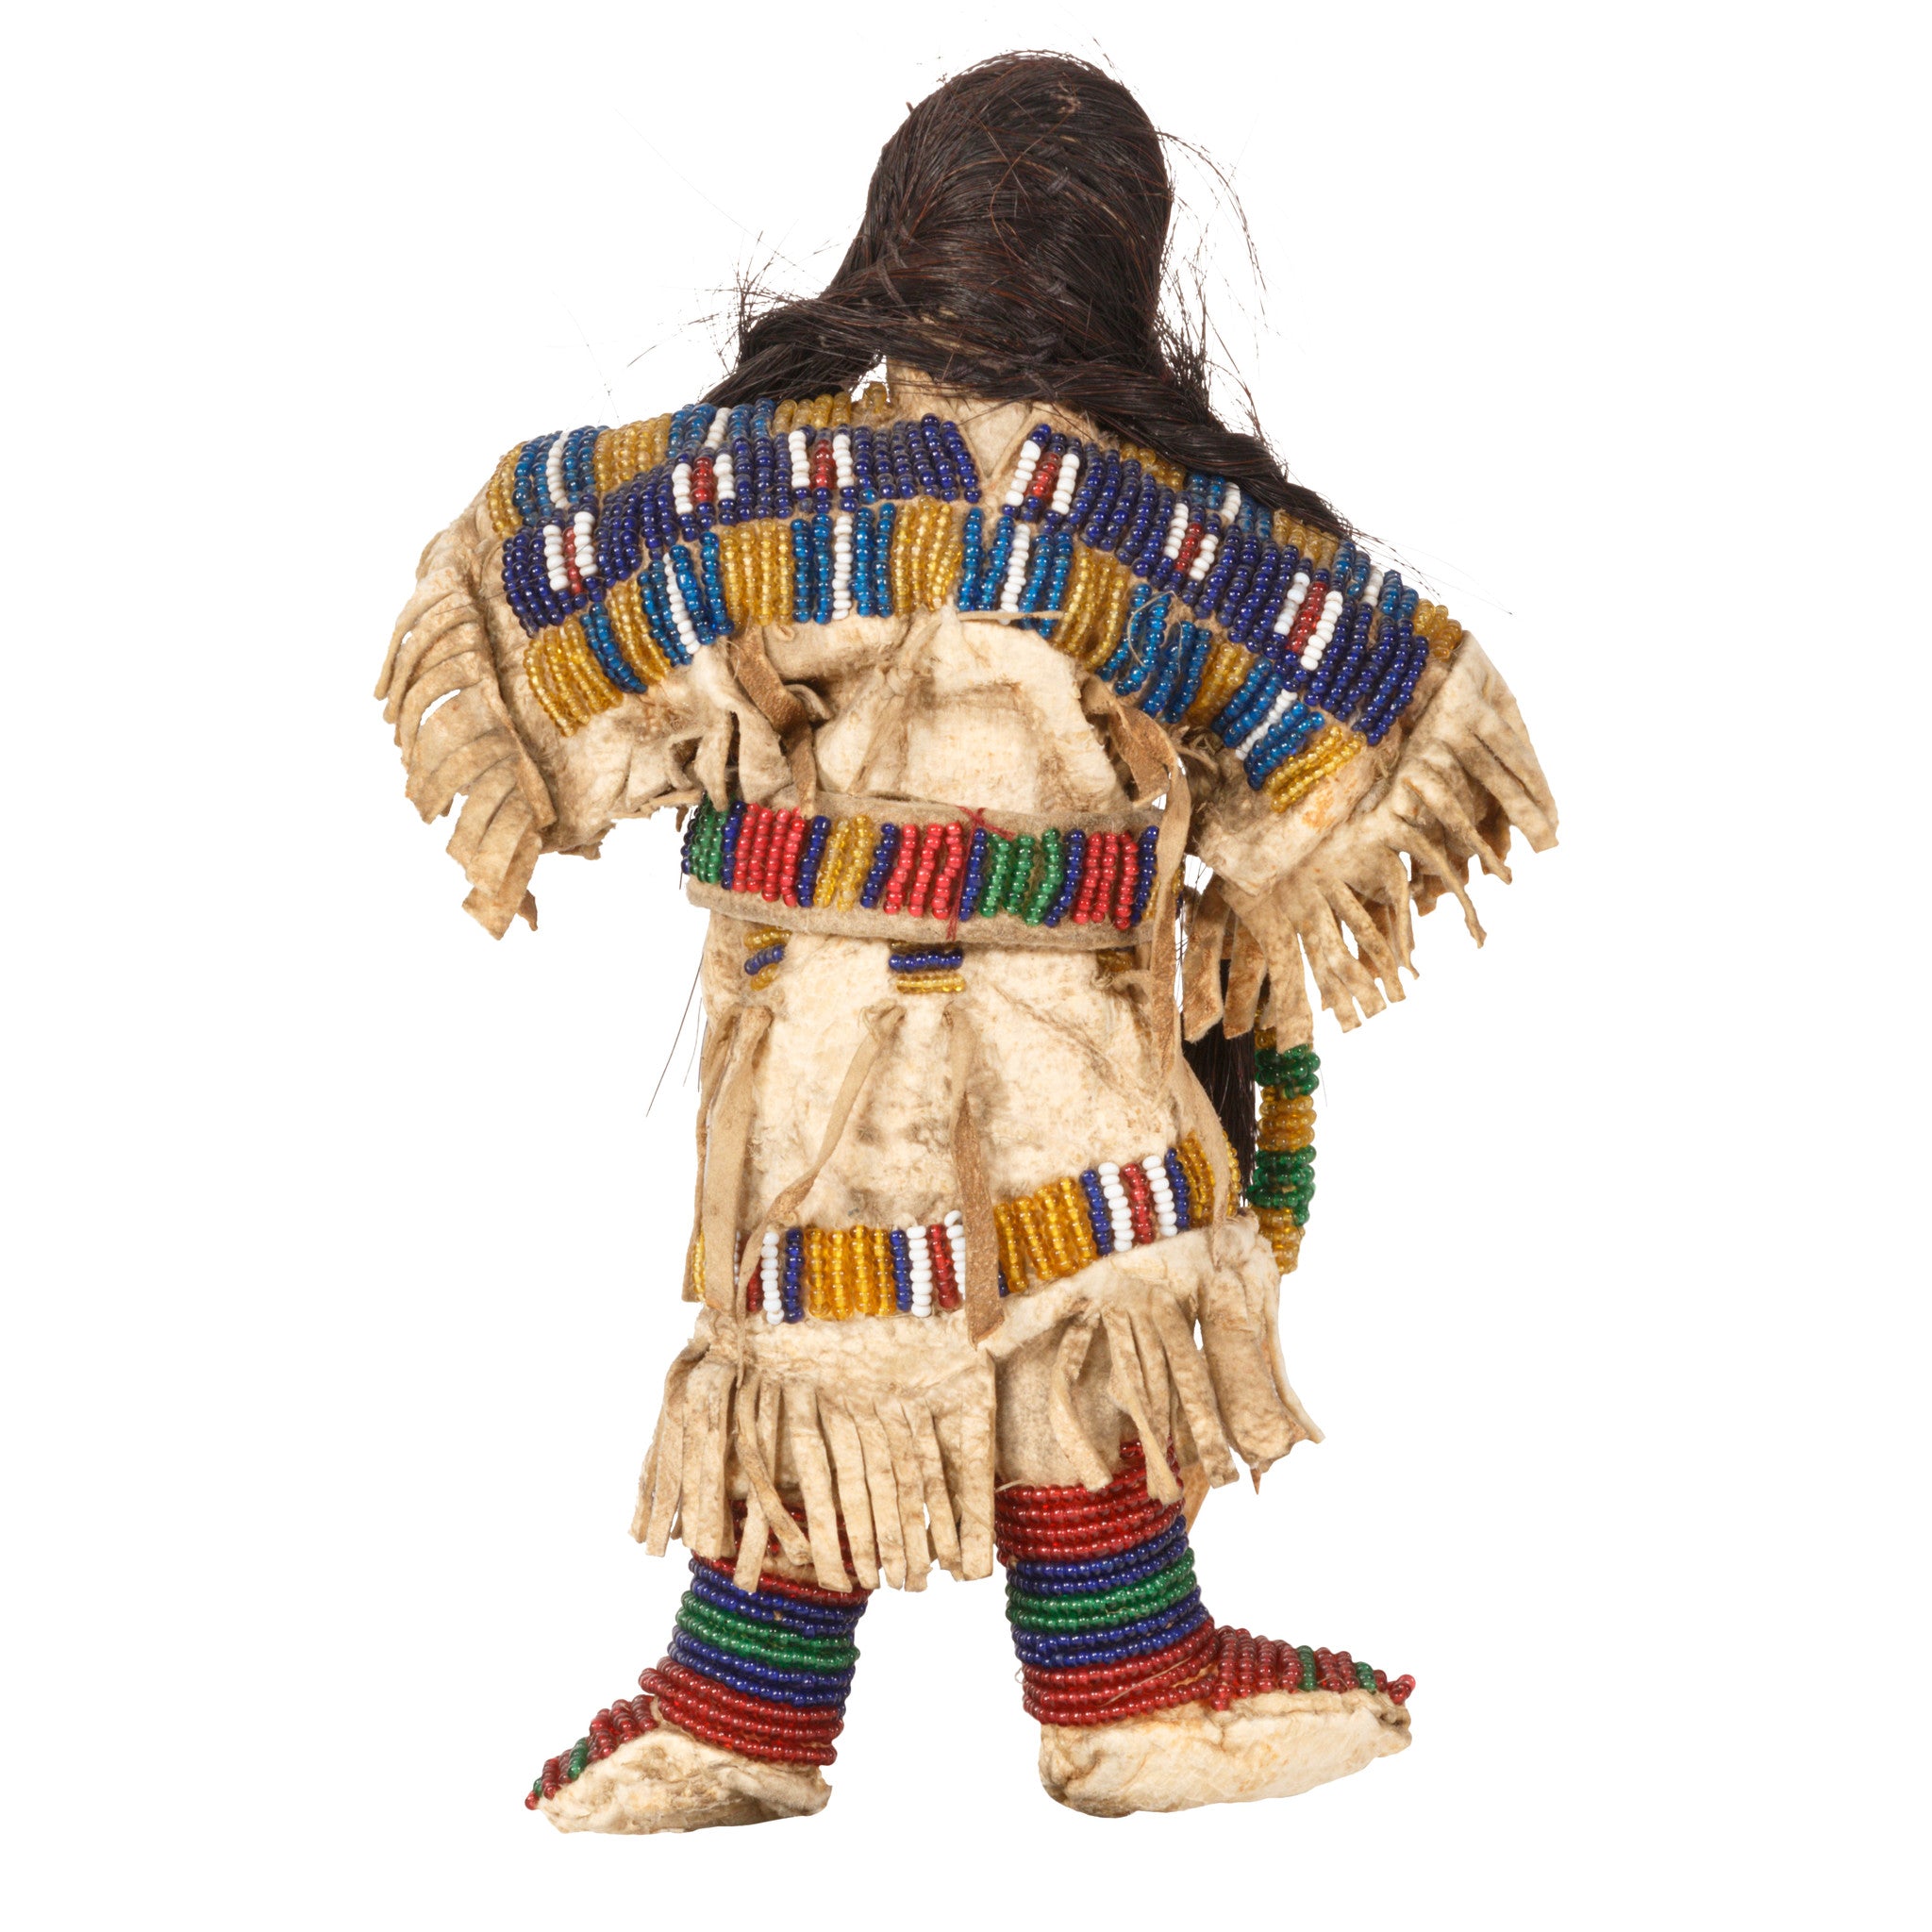 Sioux Doll from the Rosebud Reservation